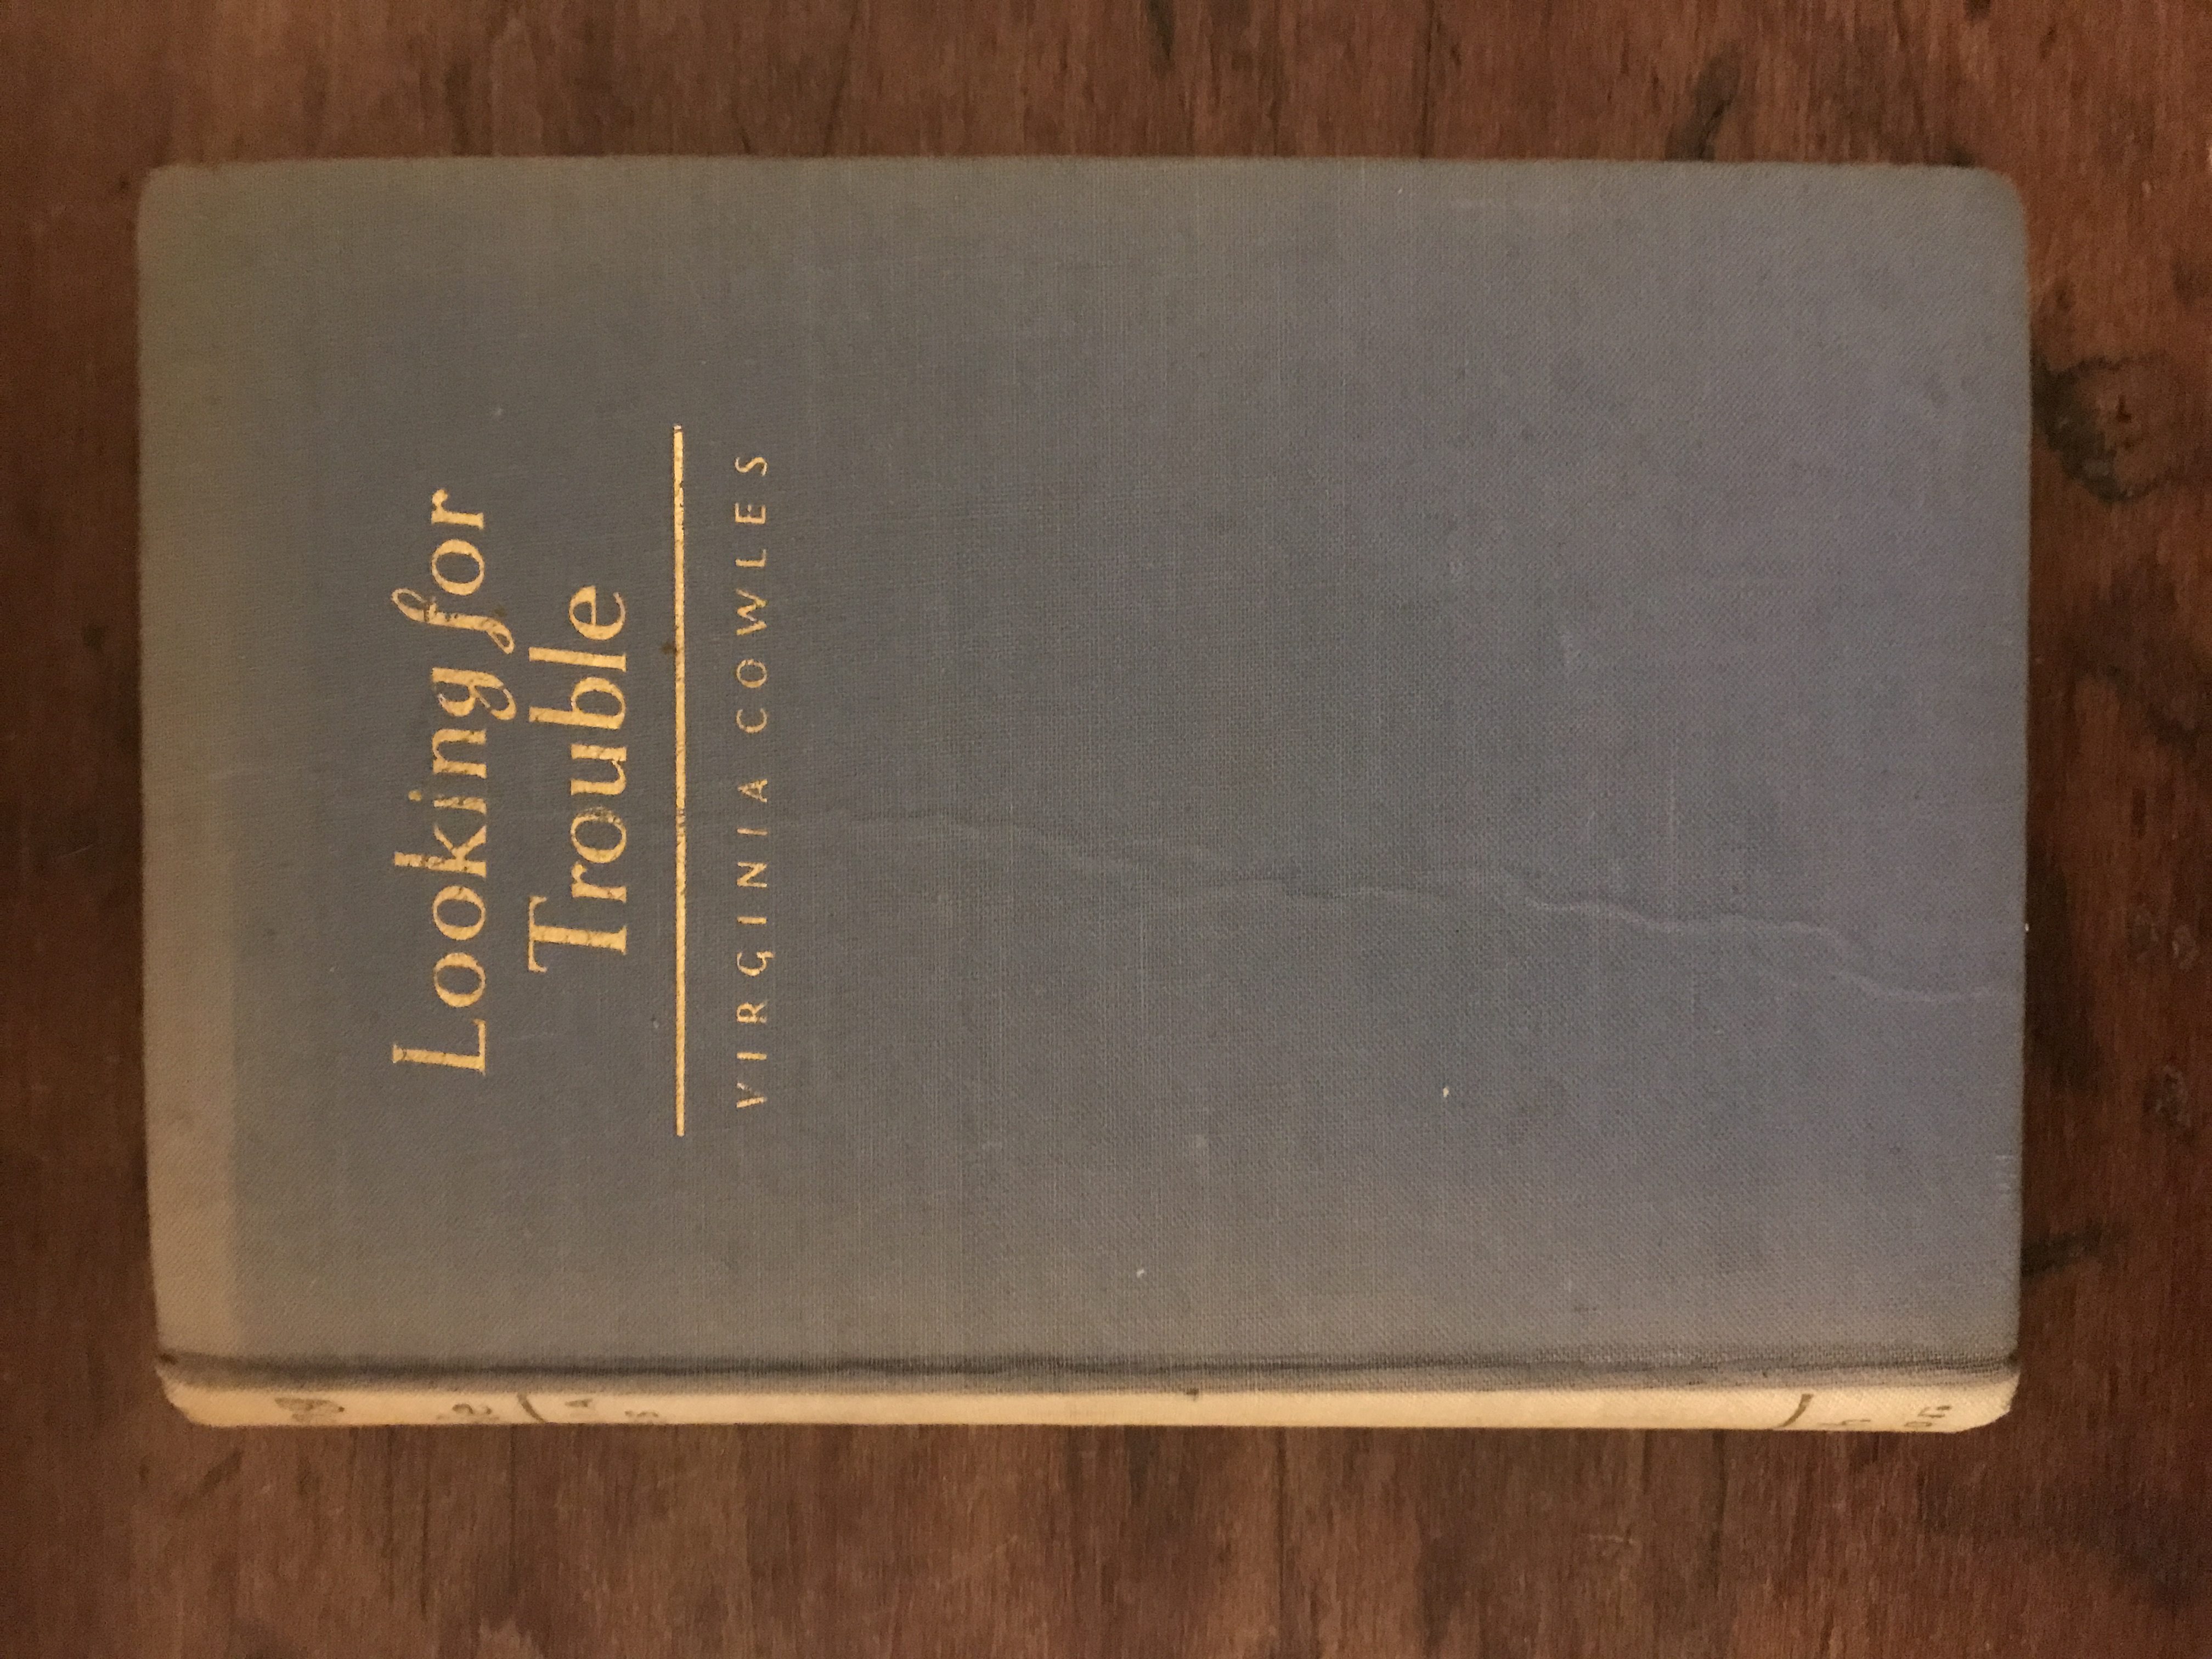 LOOKING FOR TROUBLE COWLES, VIRGINIA [Good] [Hardcover] 8vo, reprint, pp, viii, 469, gilt titled light blue cloth faded, front cover slightly creased